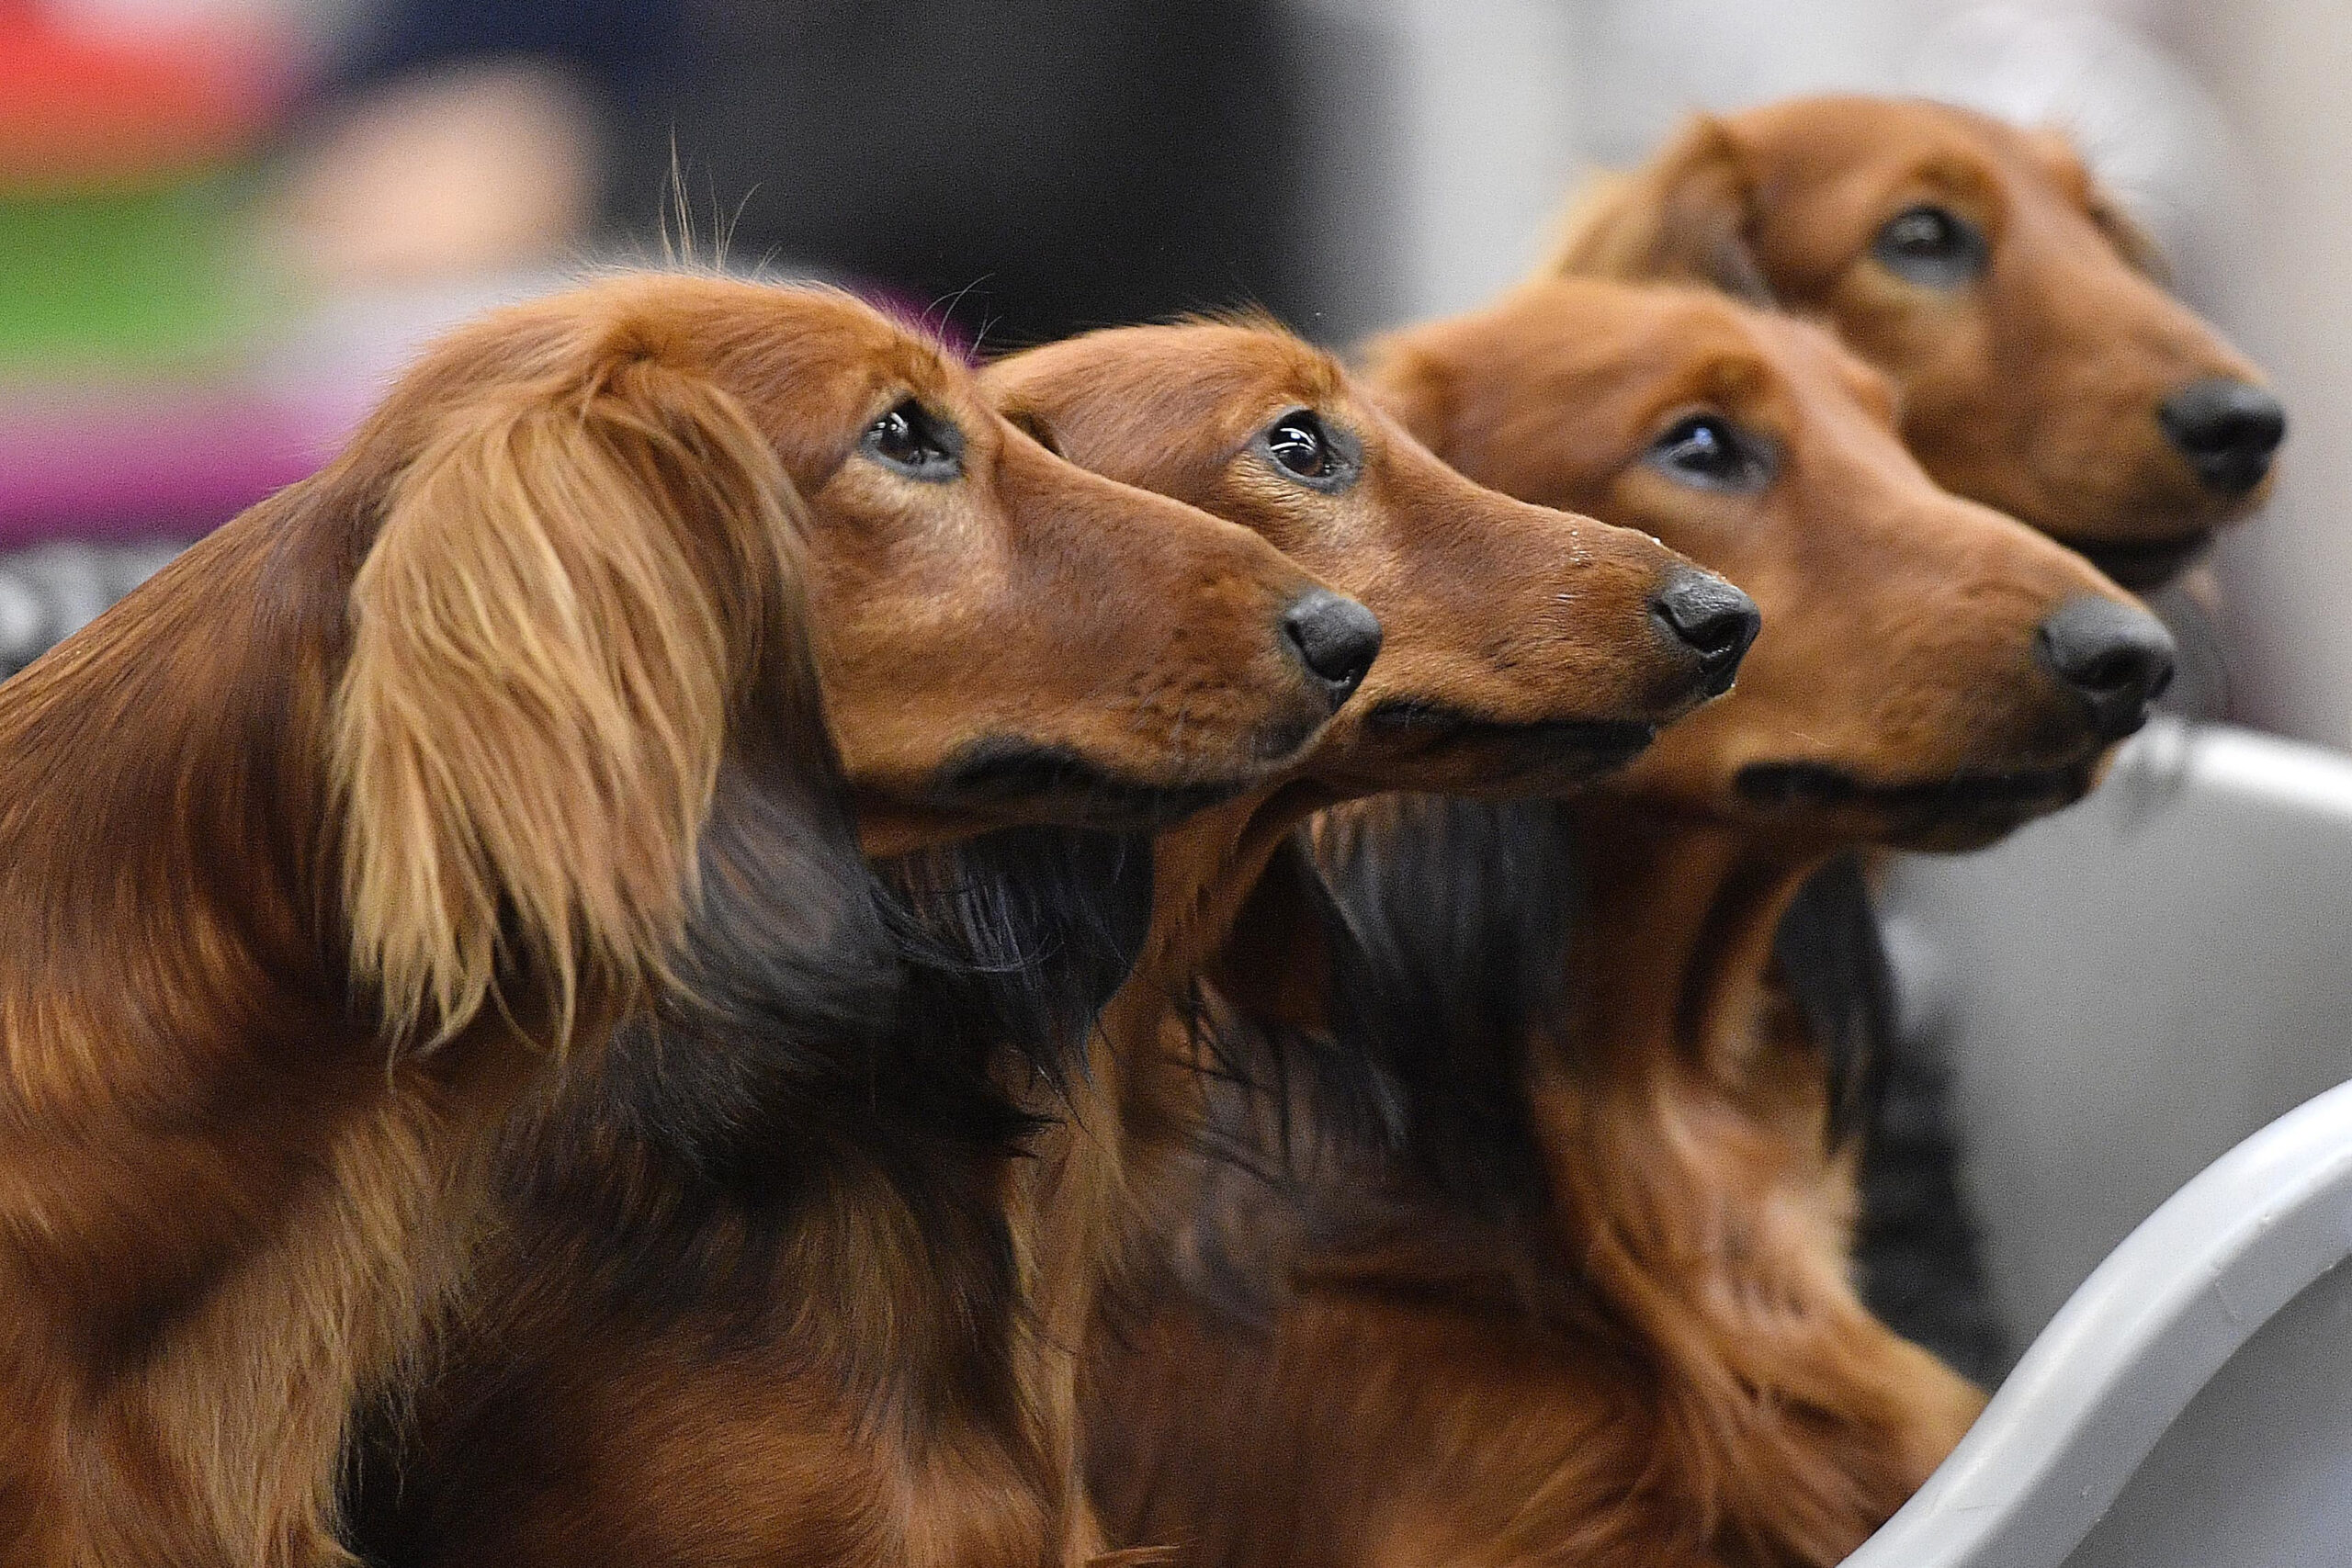 FILE - Dachshund dogs wait in a box before competition at a dog show in Dortmund, Germany, on Friday, Oct. 13, 2017. Research released on Thursday, April 28, 2022, confirms what dog lovers know _ every pup is truly an individual. A new study has found that many of the popular stereotypes about the behavior of specific breeds aren’t supported by science. (AP Photo/Martin Meissner, File)